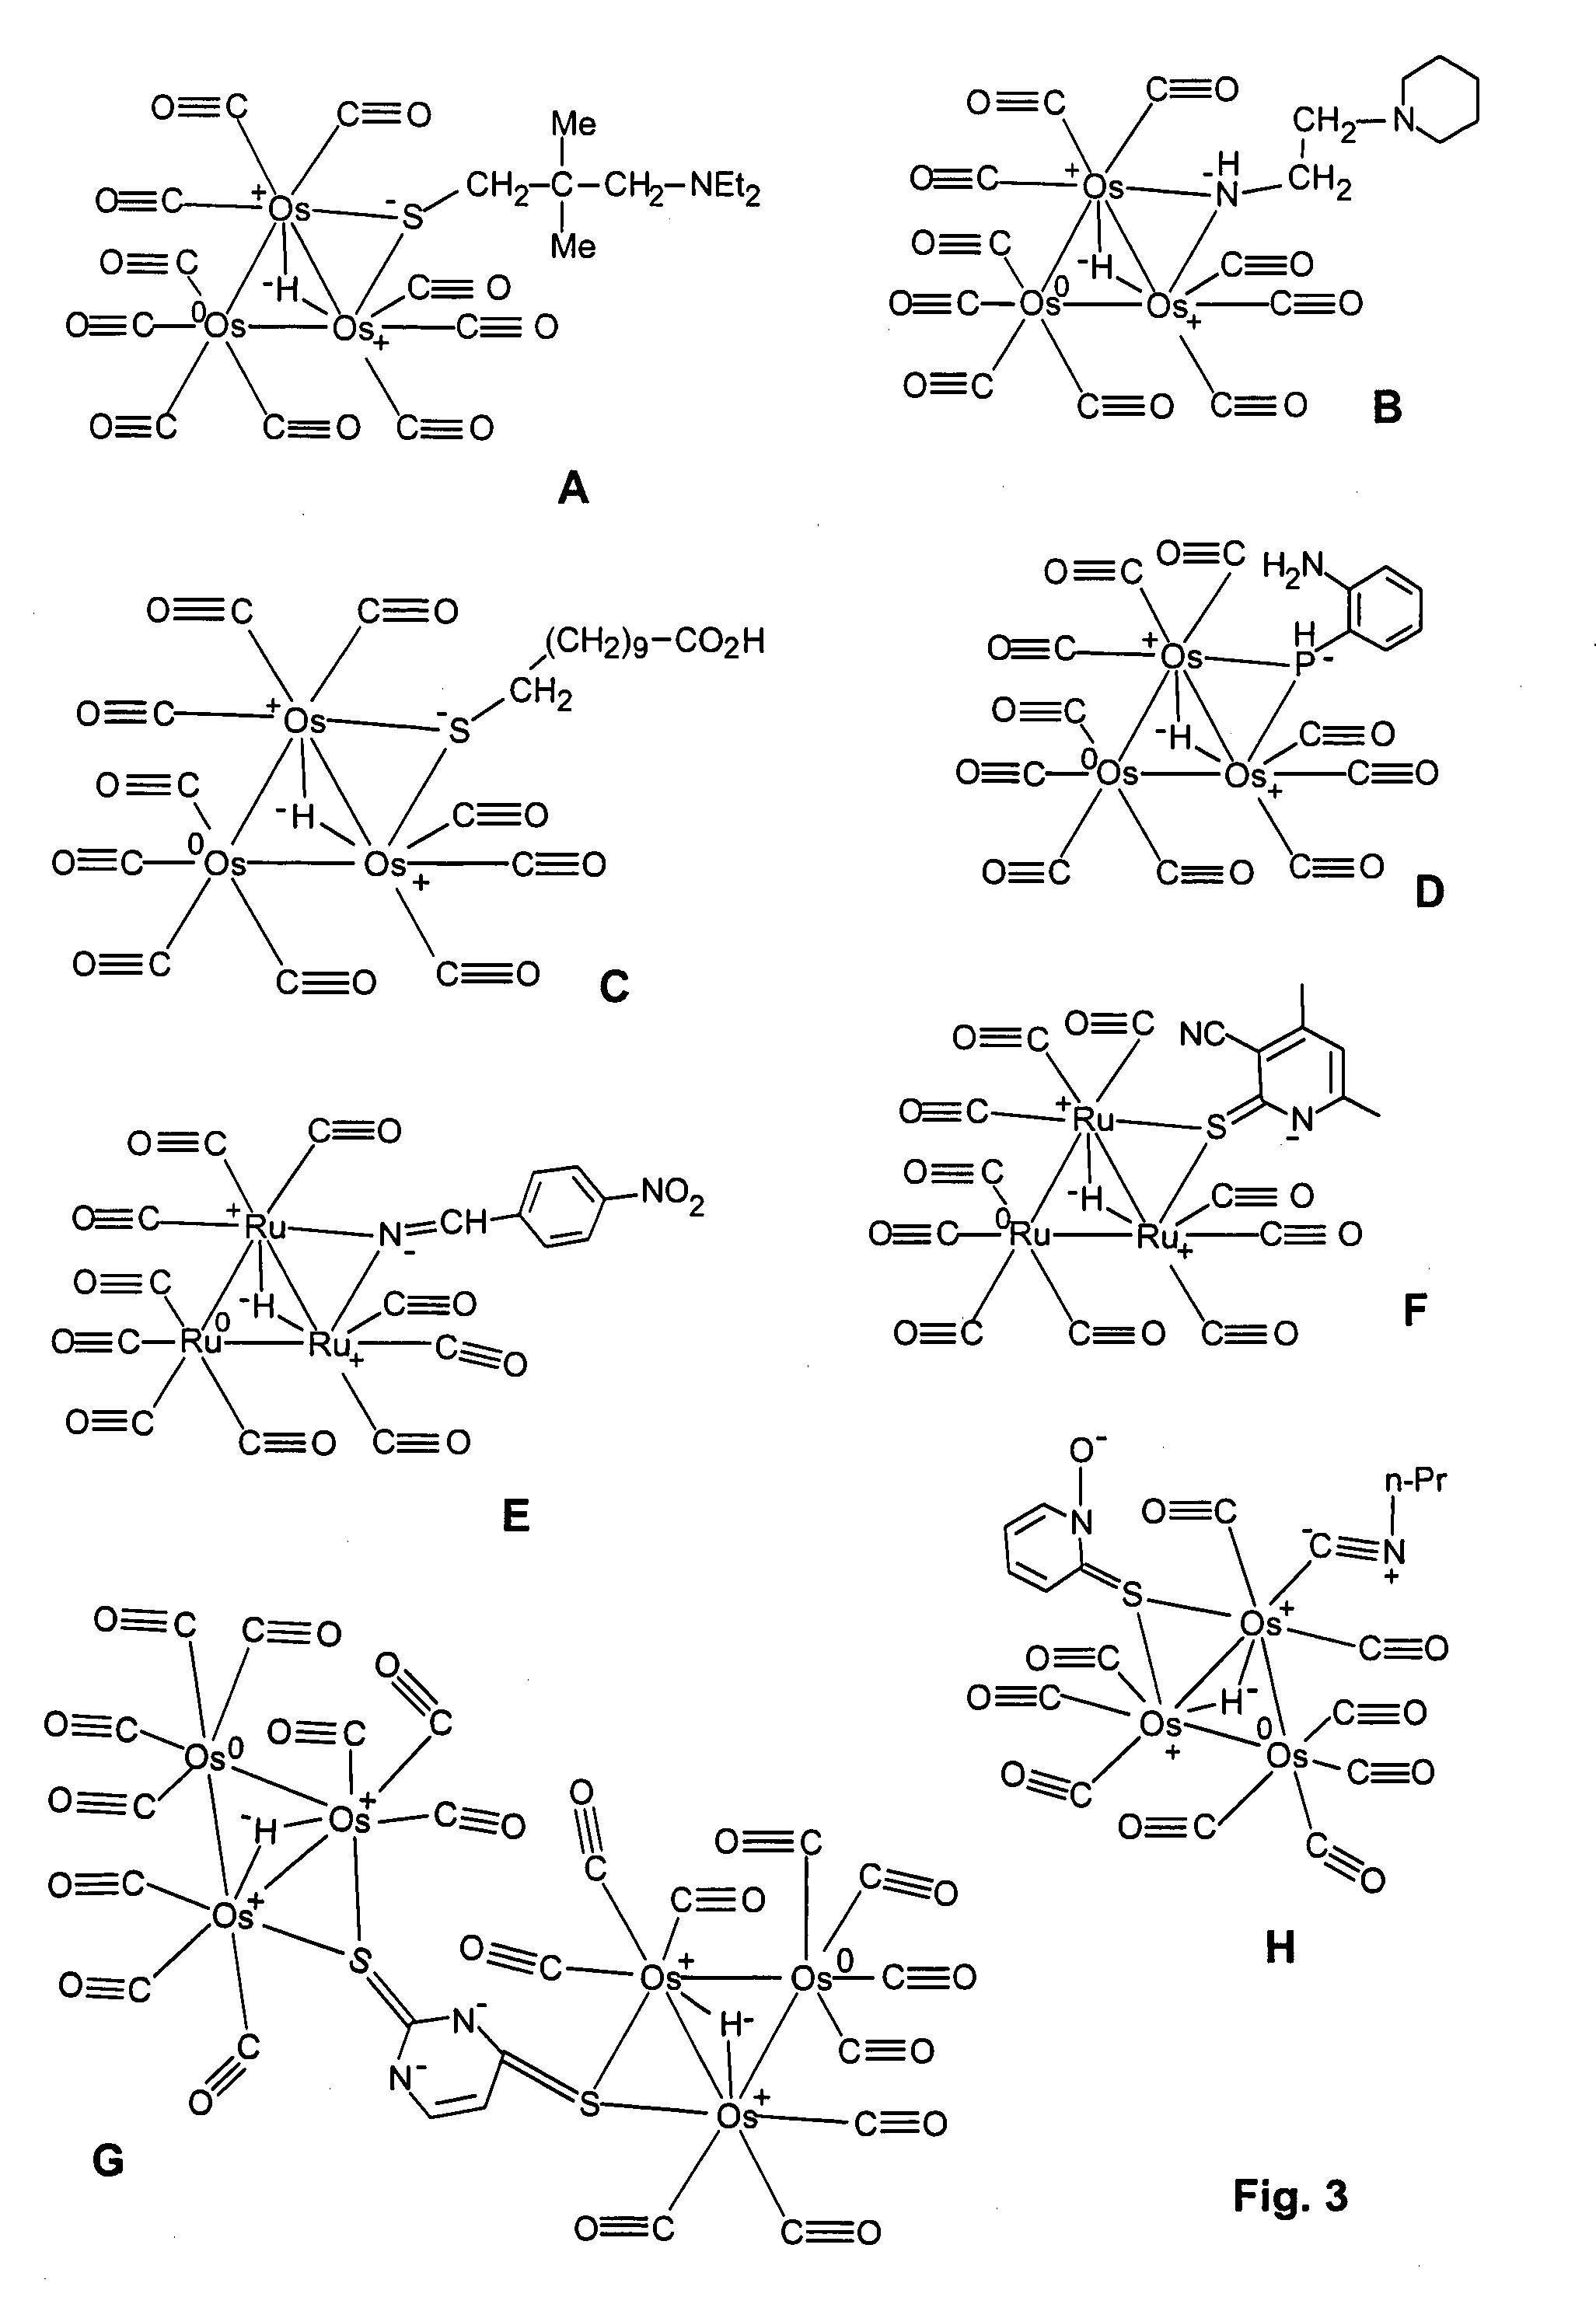 Metal triangulo compound and methods of using the same